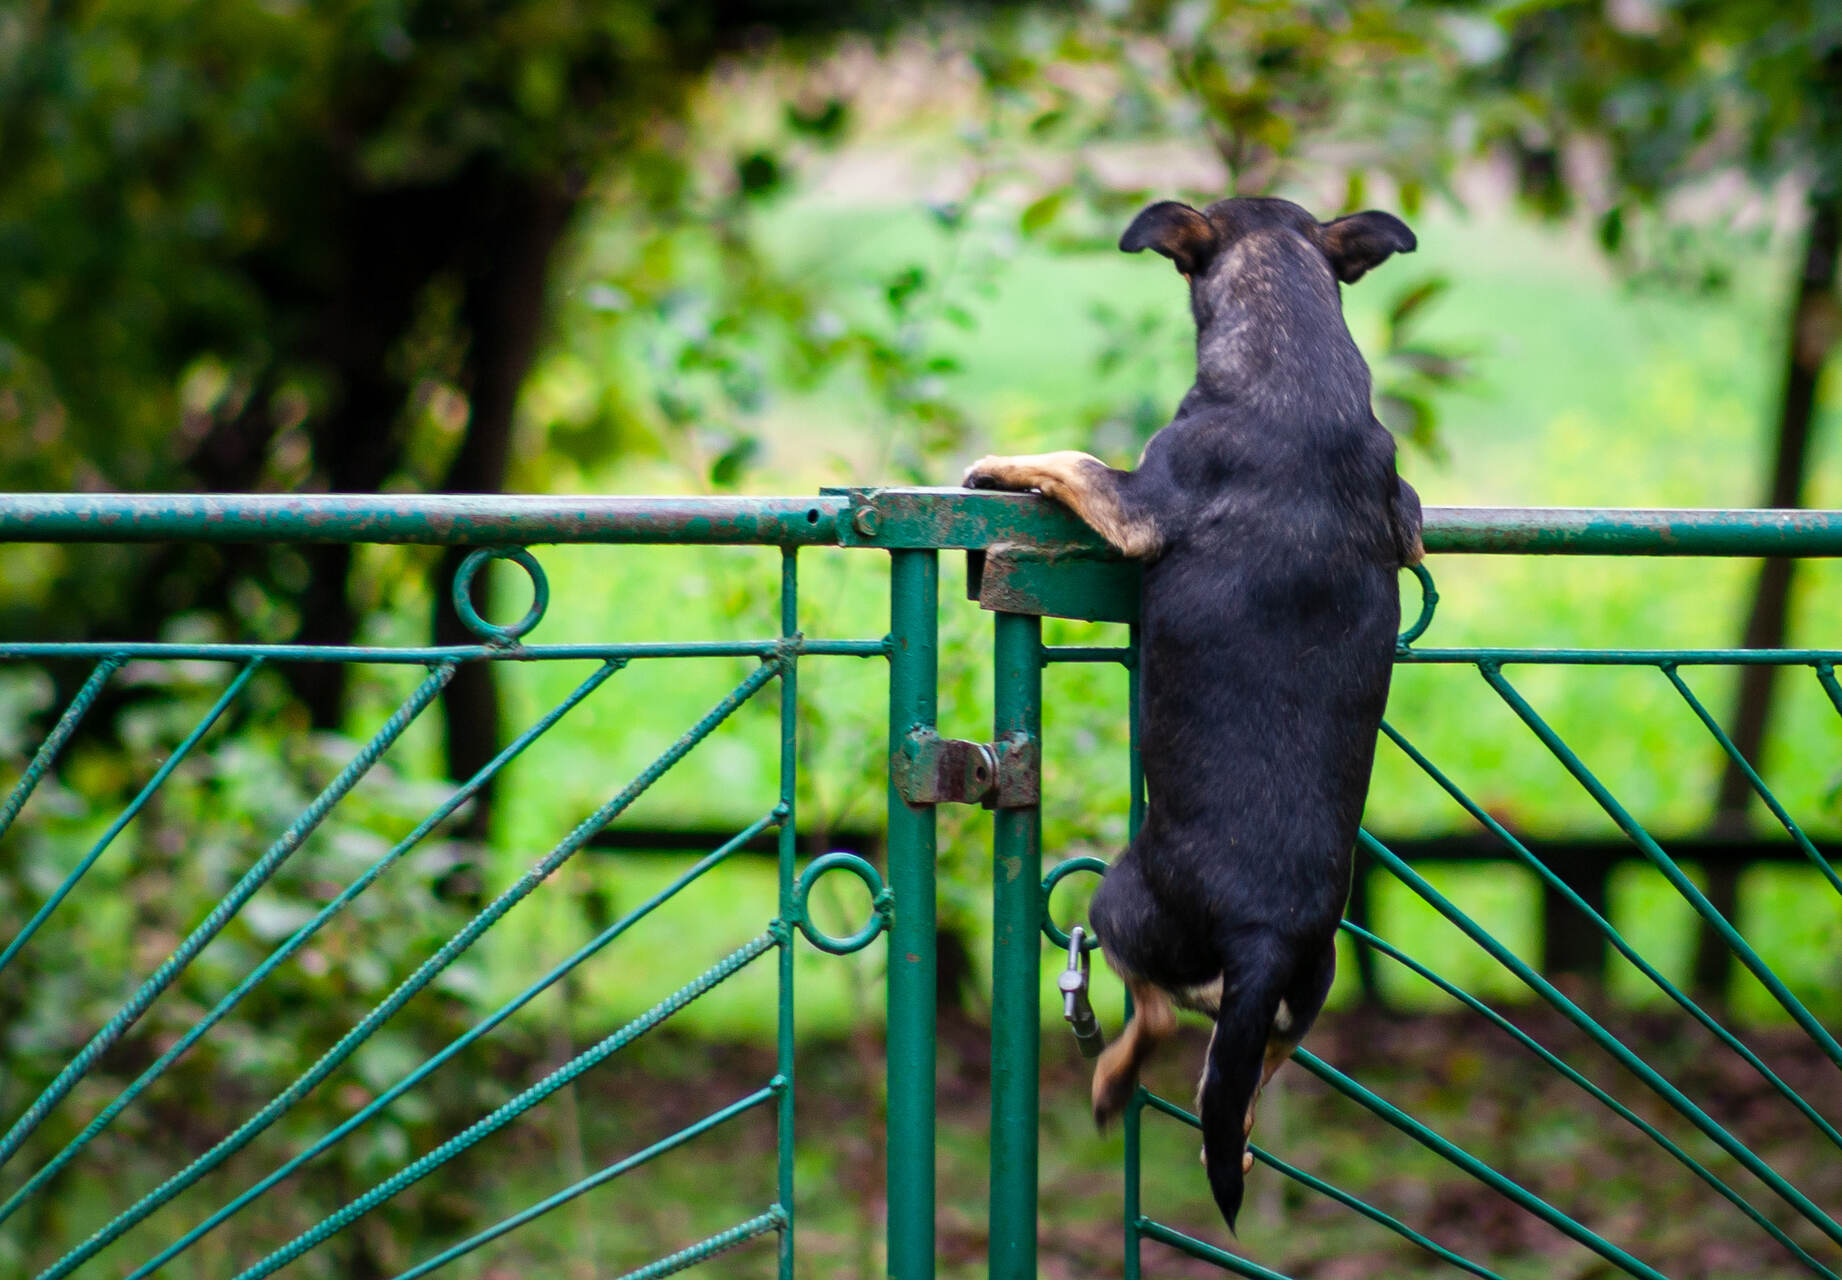 A dog trying to escape home by climbing the fence